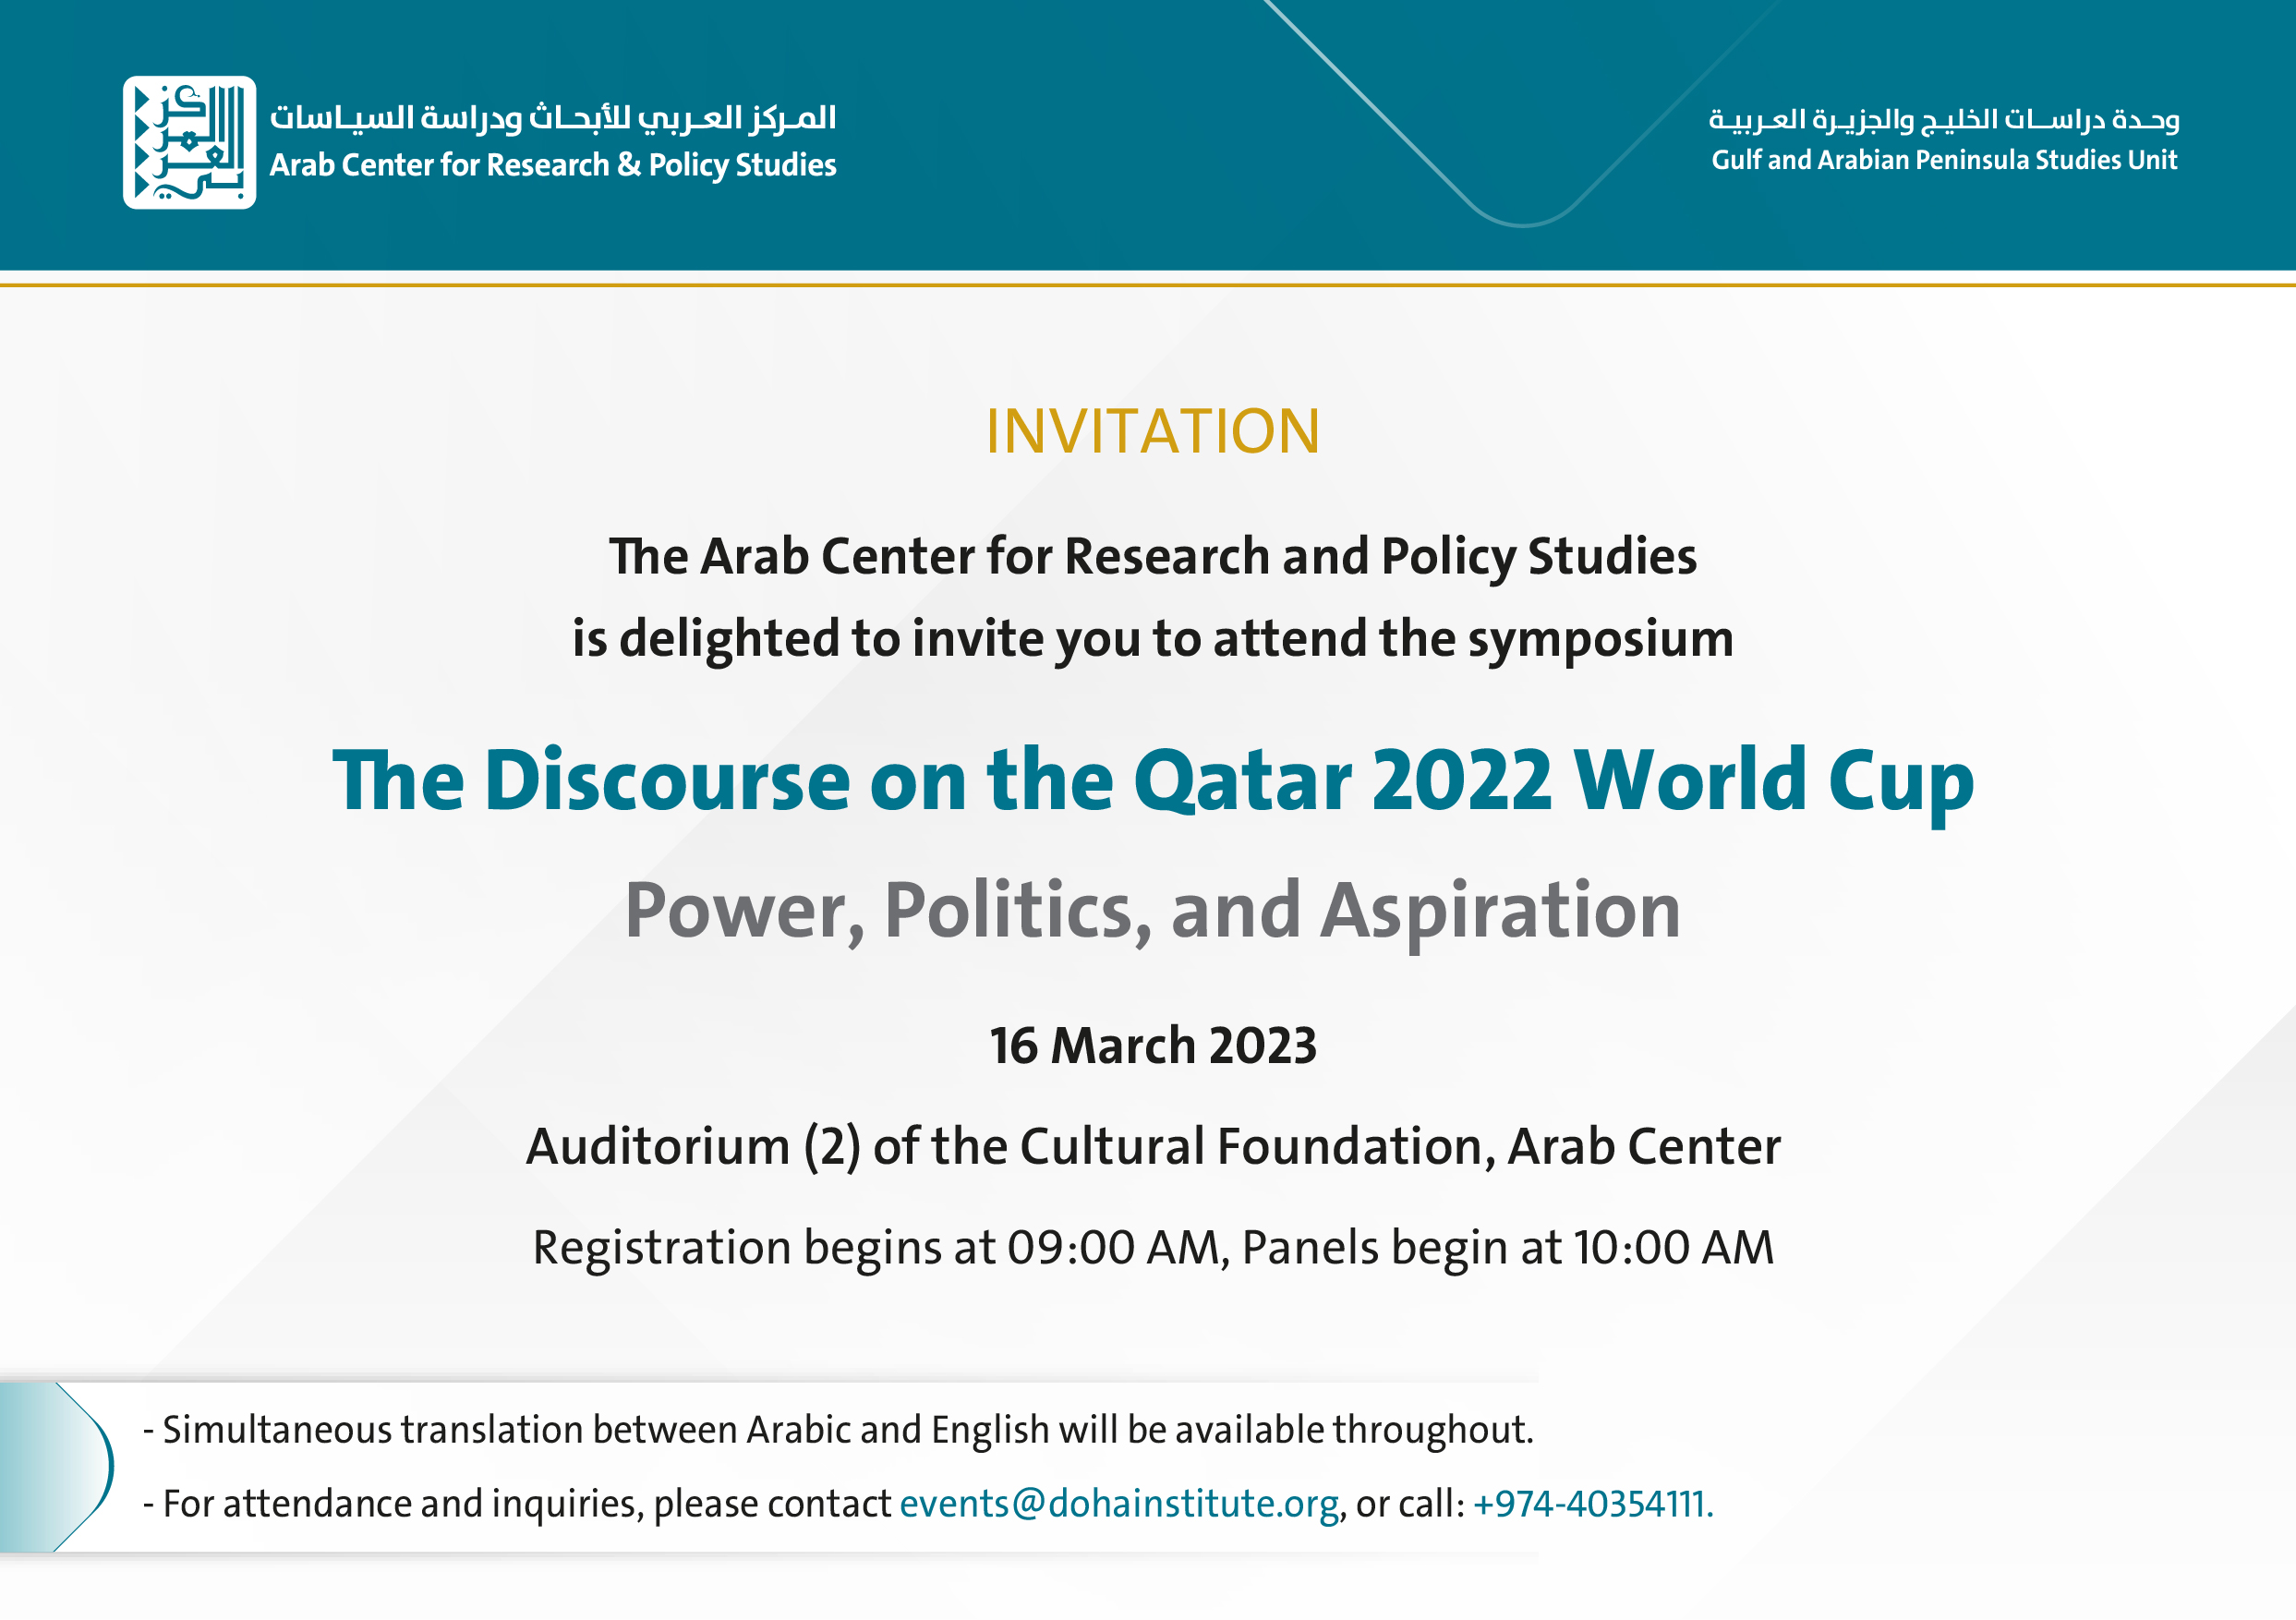 Gulf and Arabian Peninsula Studies Unit at ACRPS organizes “The Discourse on the Qatar 2022 World Cup